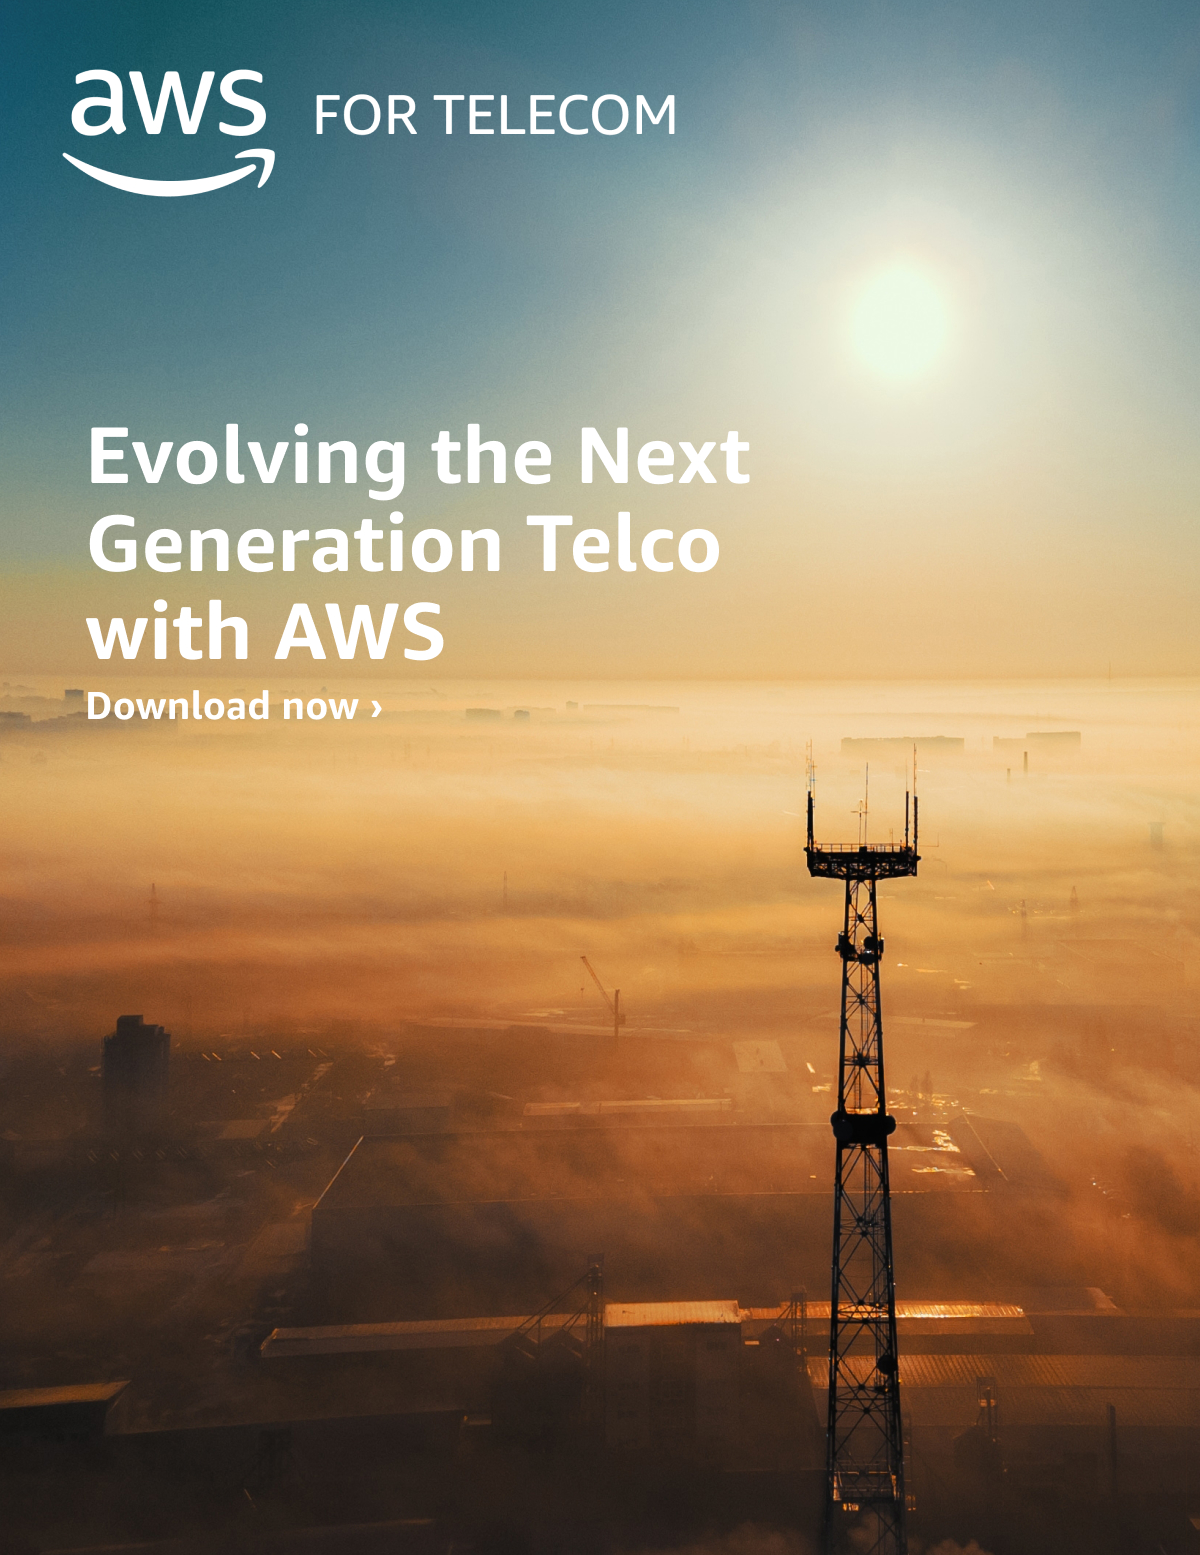 Evolving the Next Generation Telco with AWS